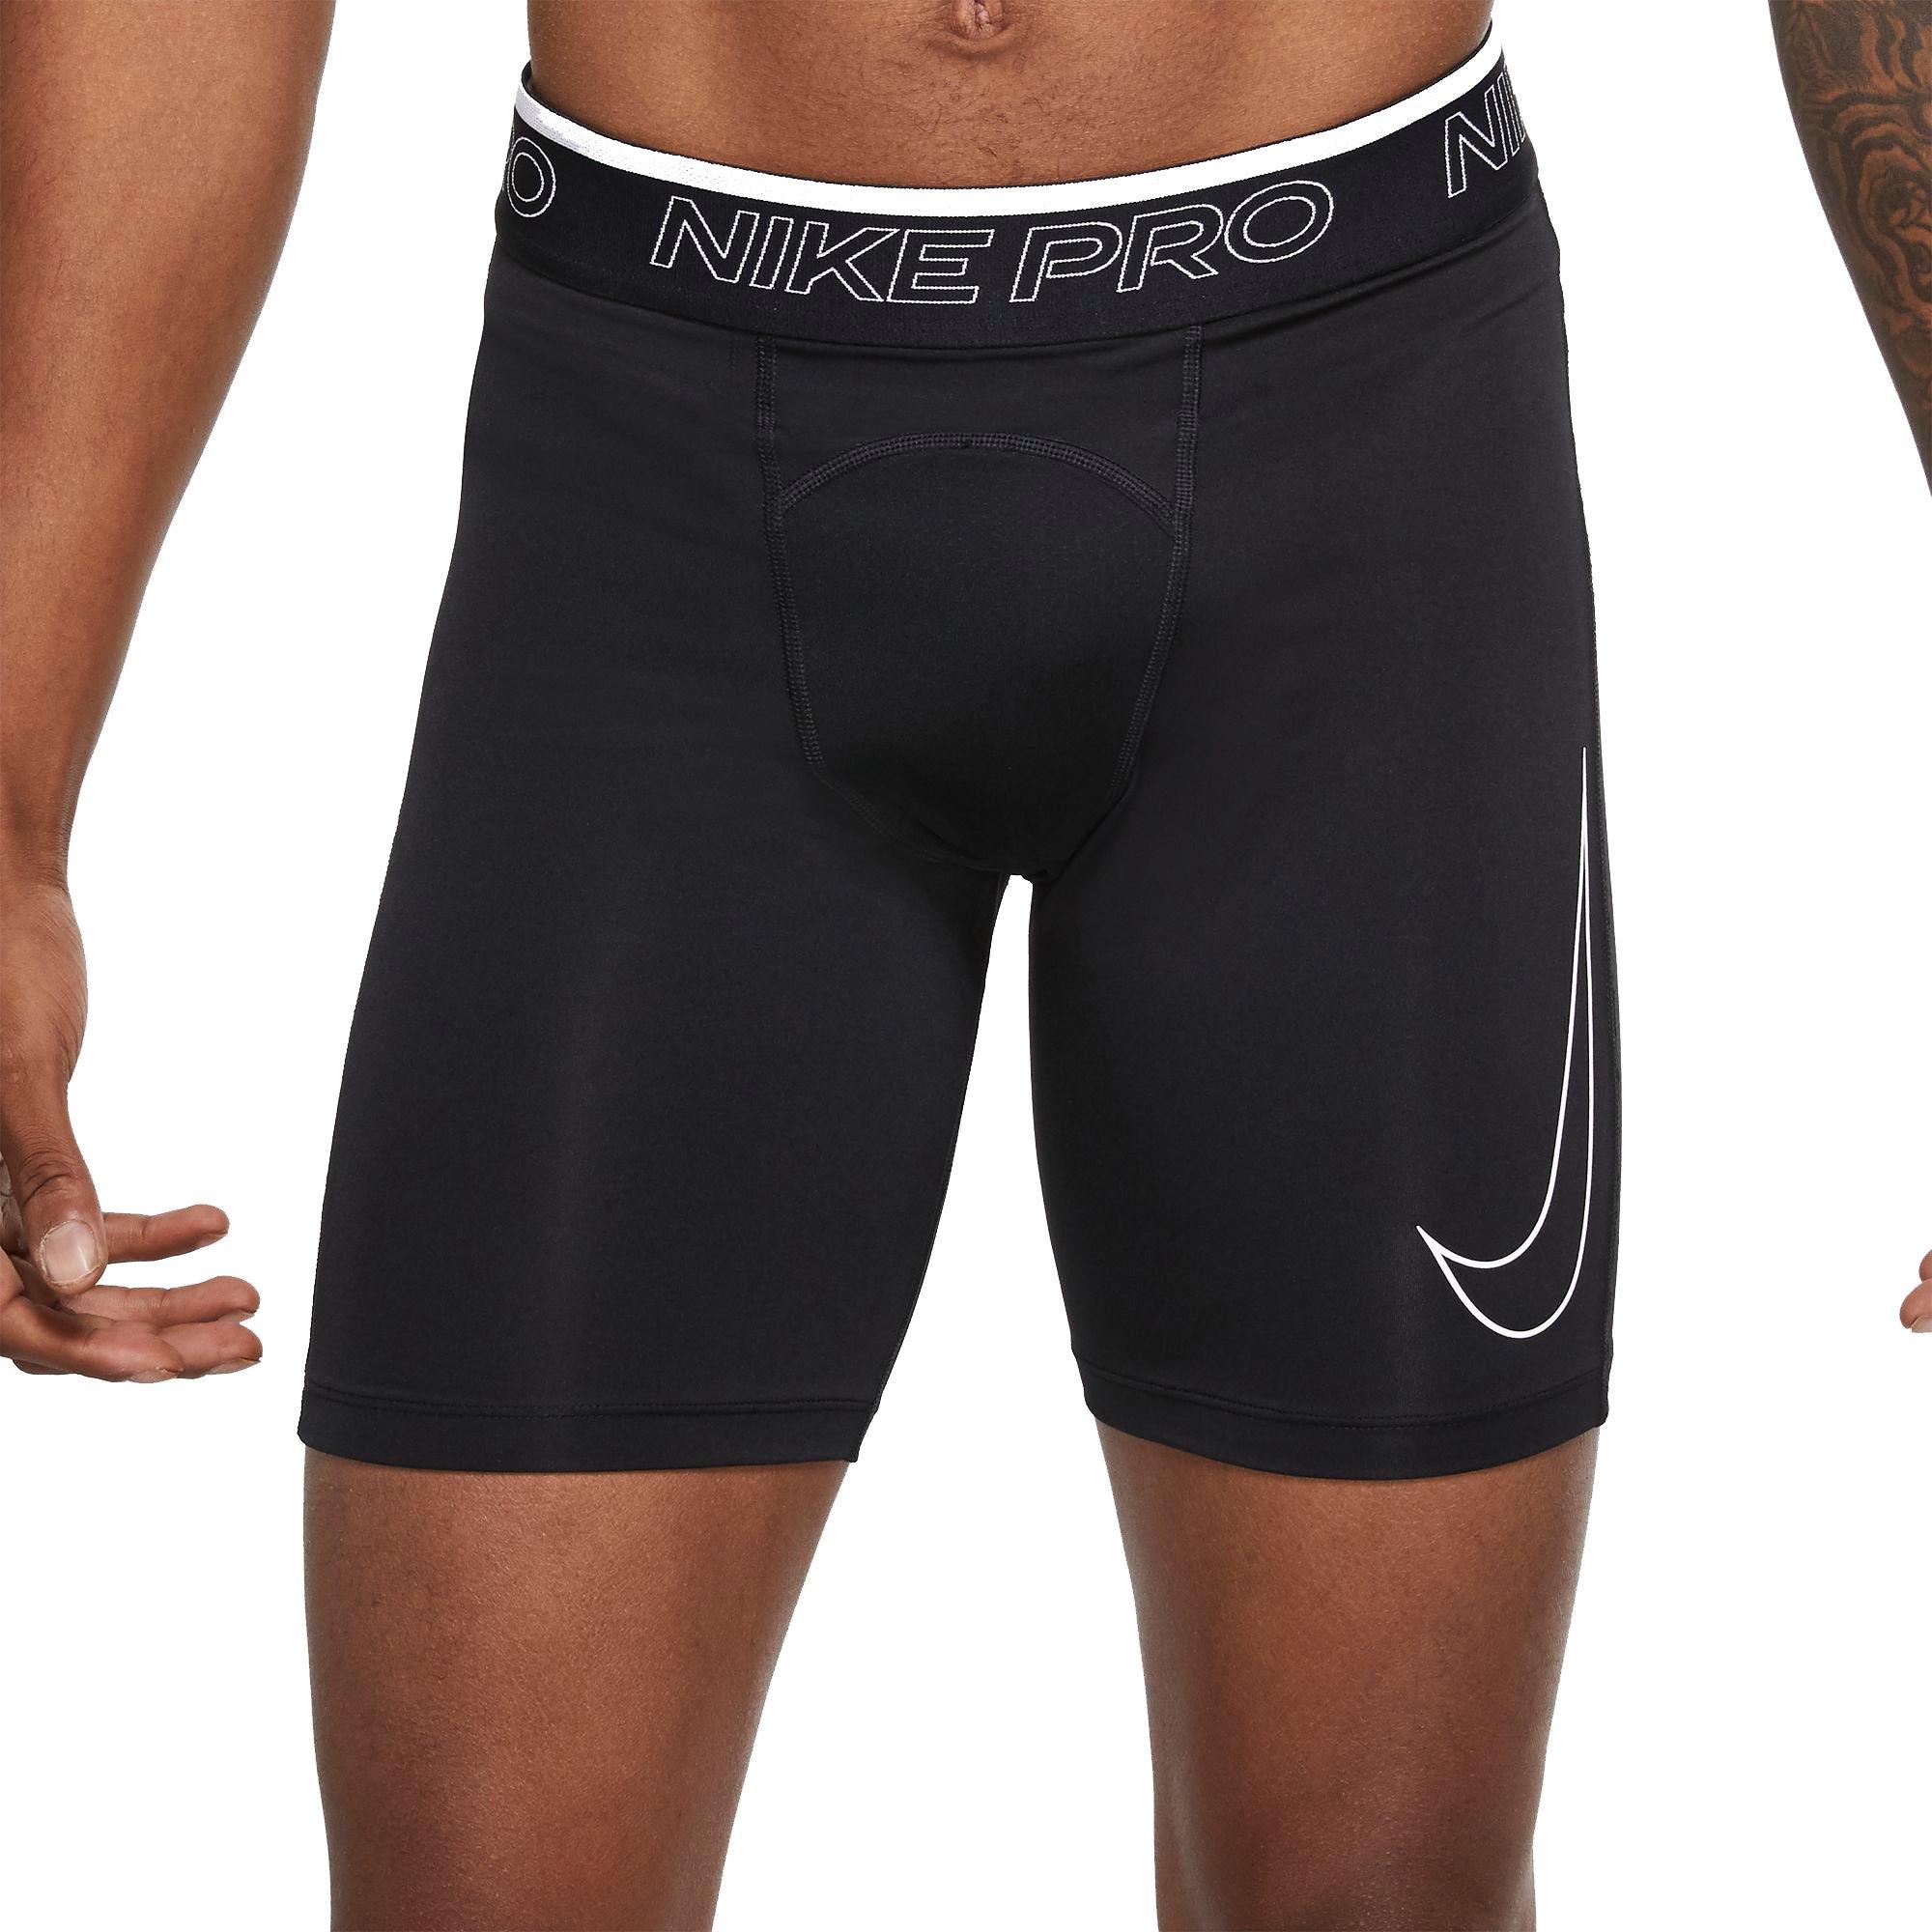 Nike Pro Hyperstrong Padded Compression Shorts Men's Black New with Tags  3XL - Locker Room Direct